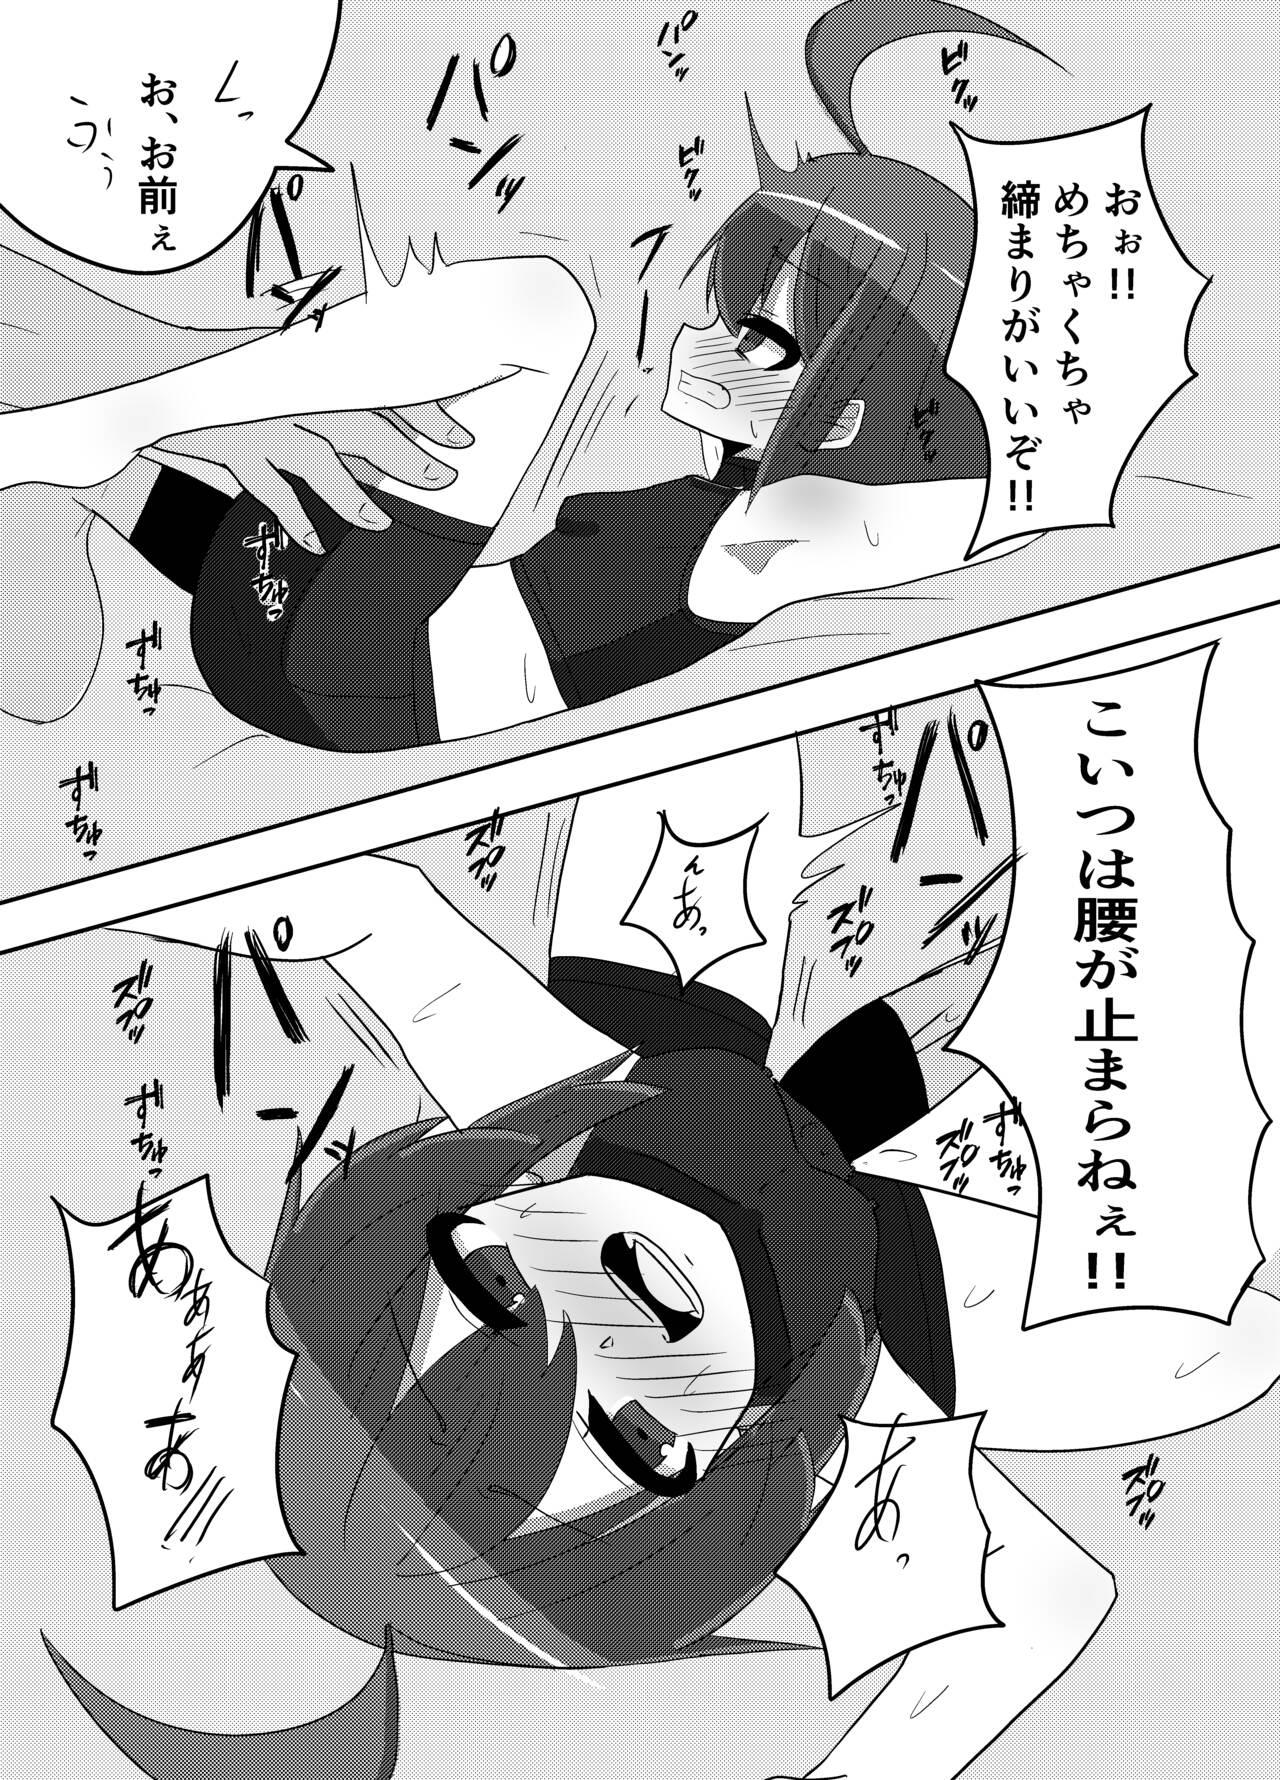 Rubbing Linne-chan's in a Real Pinch! - Under night in-birth Wet - Page 11